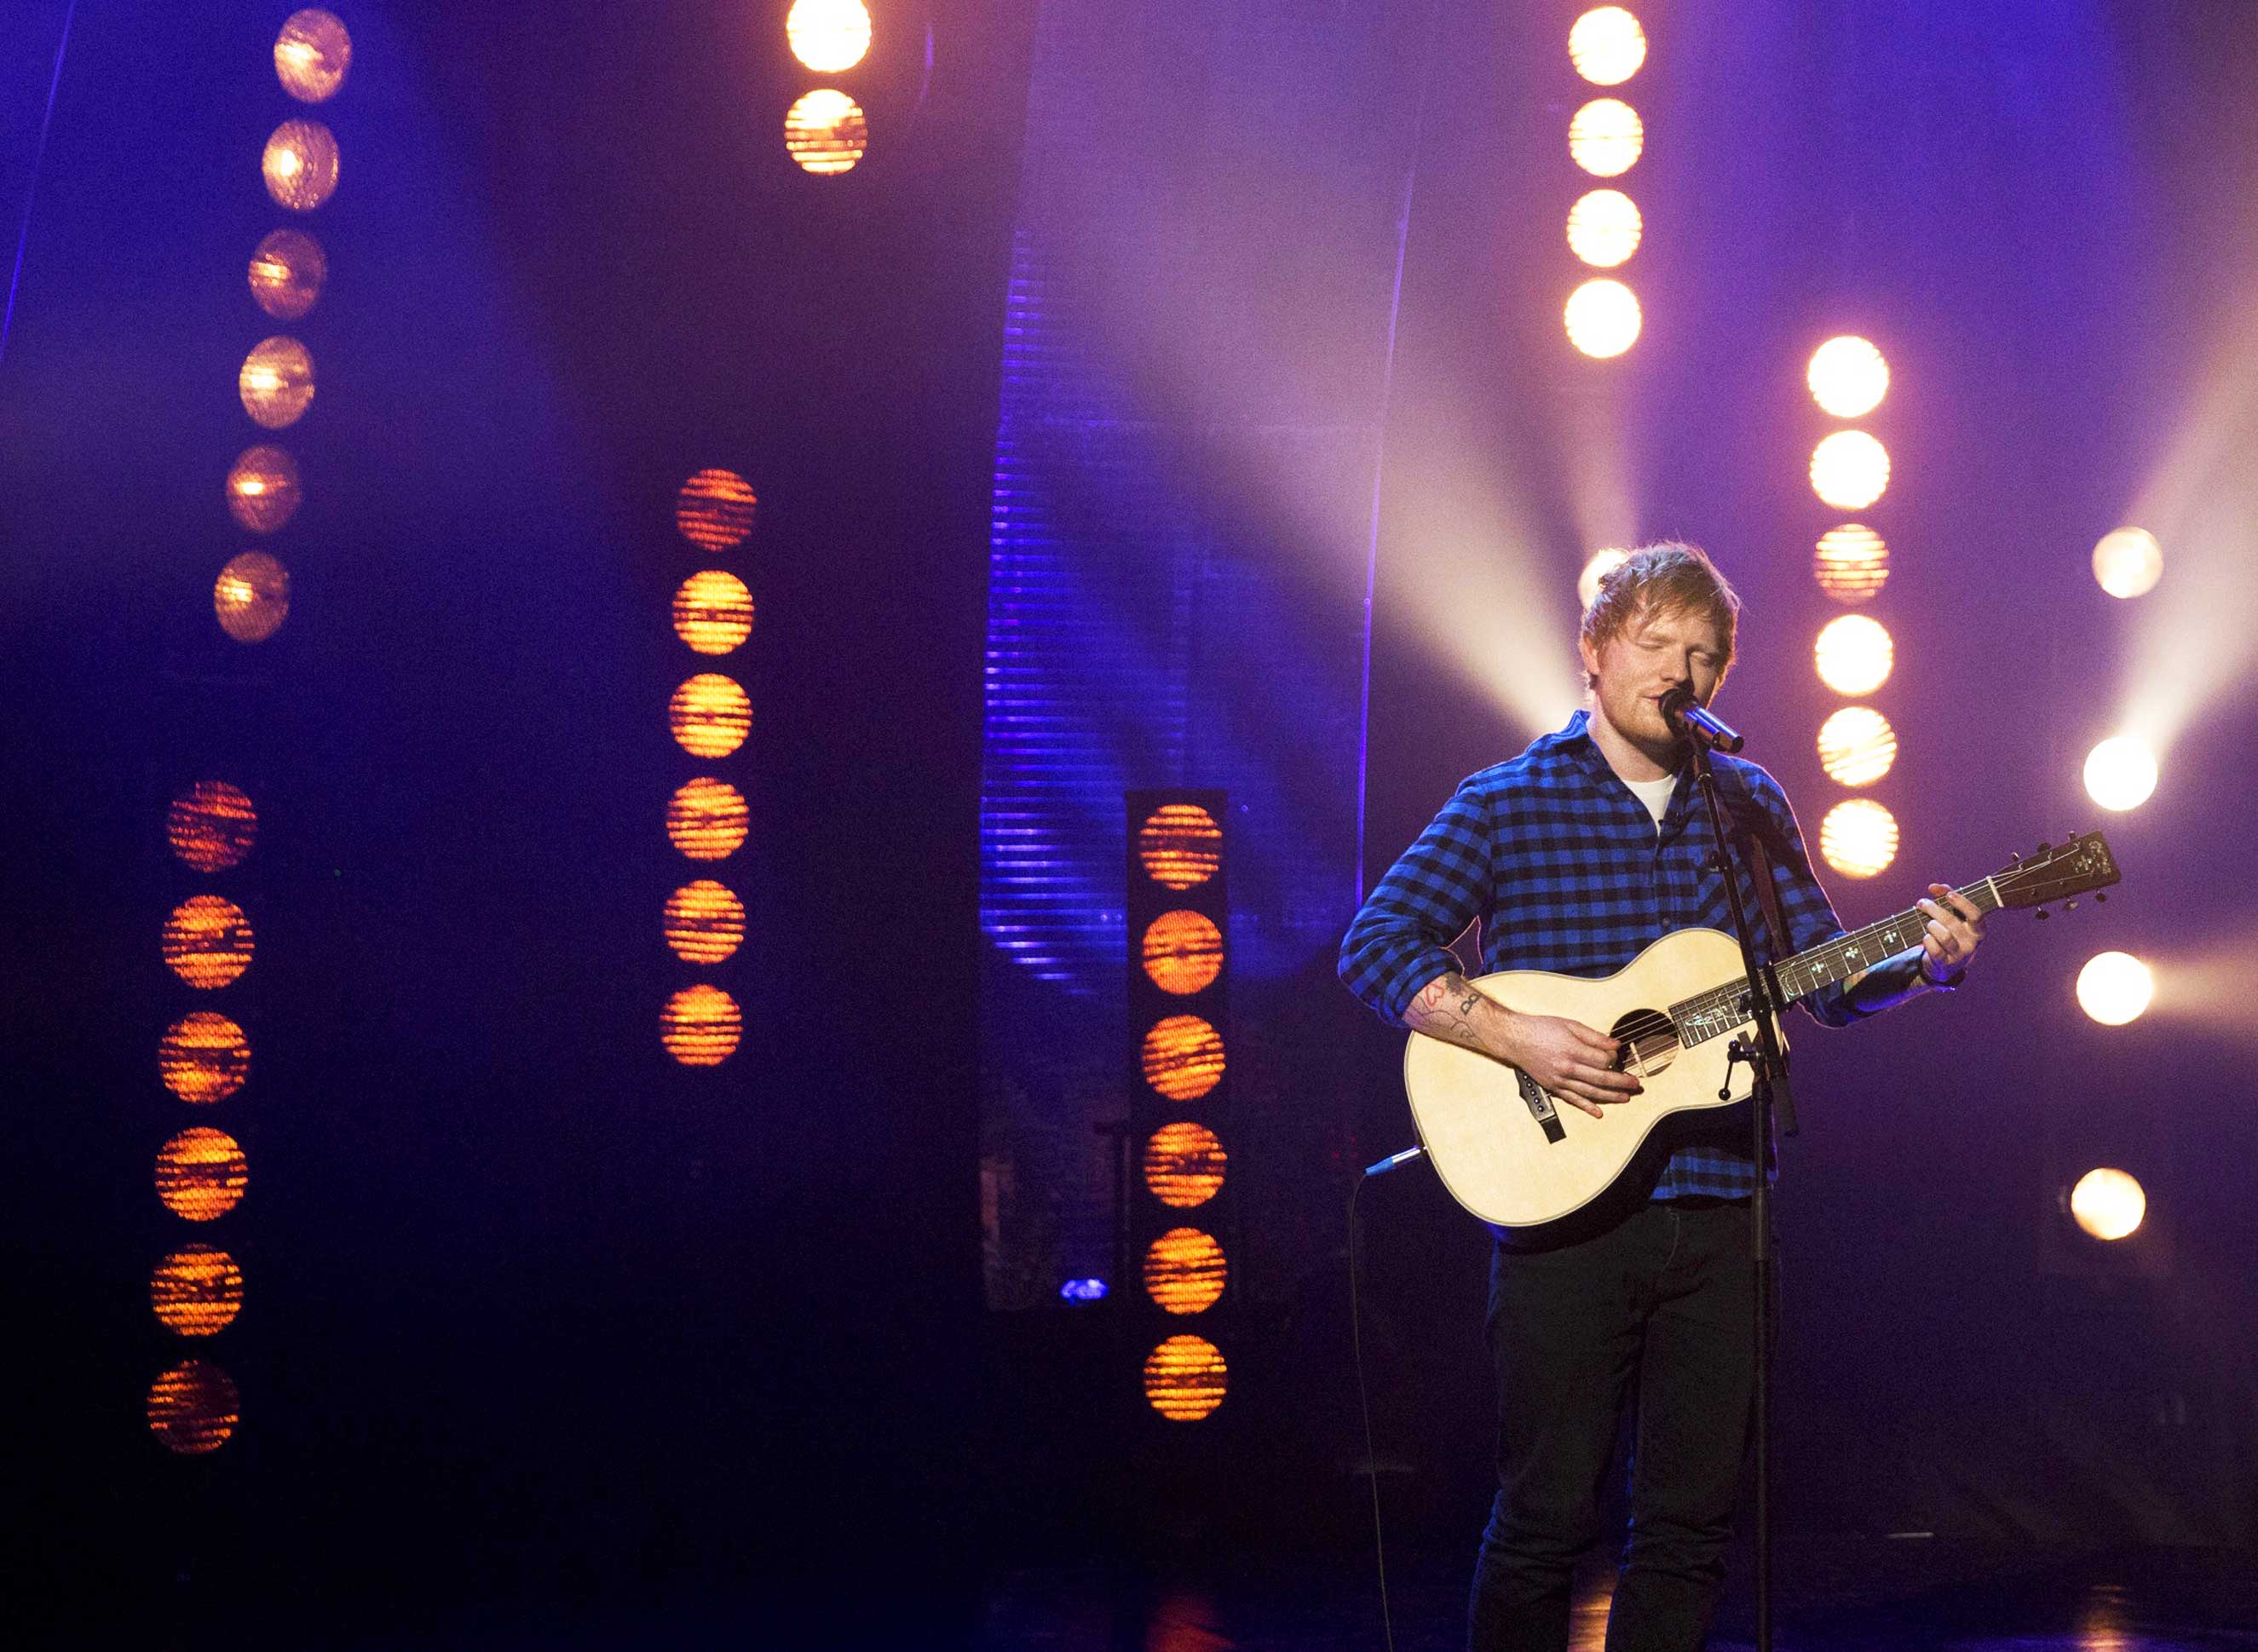 Ed Sheeran performs during the filming of the Graham Norton Show at The London Studios, South London on Thursday January 19, 2017. (Isabel Infantes—PA Wire/AP)